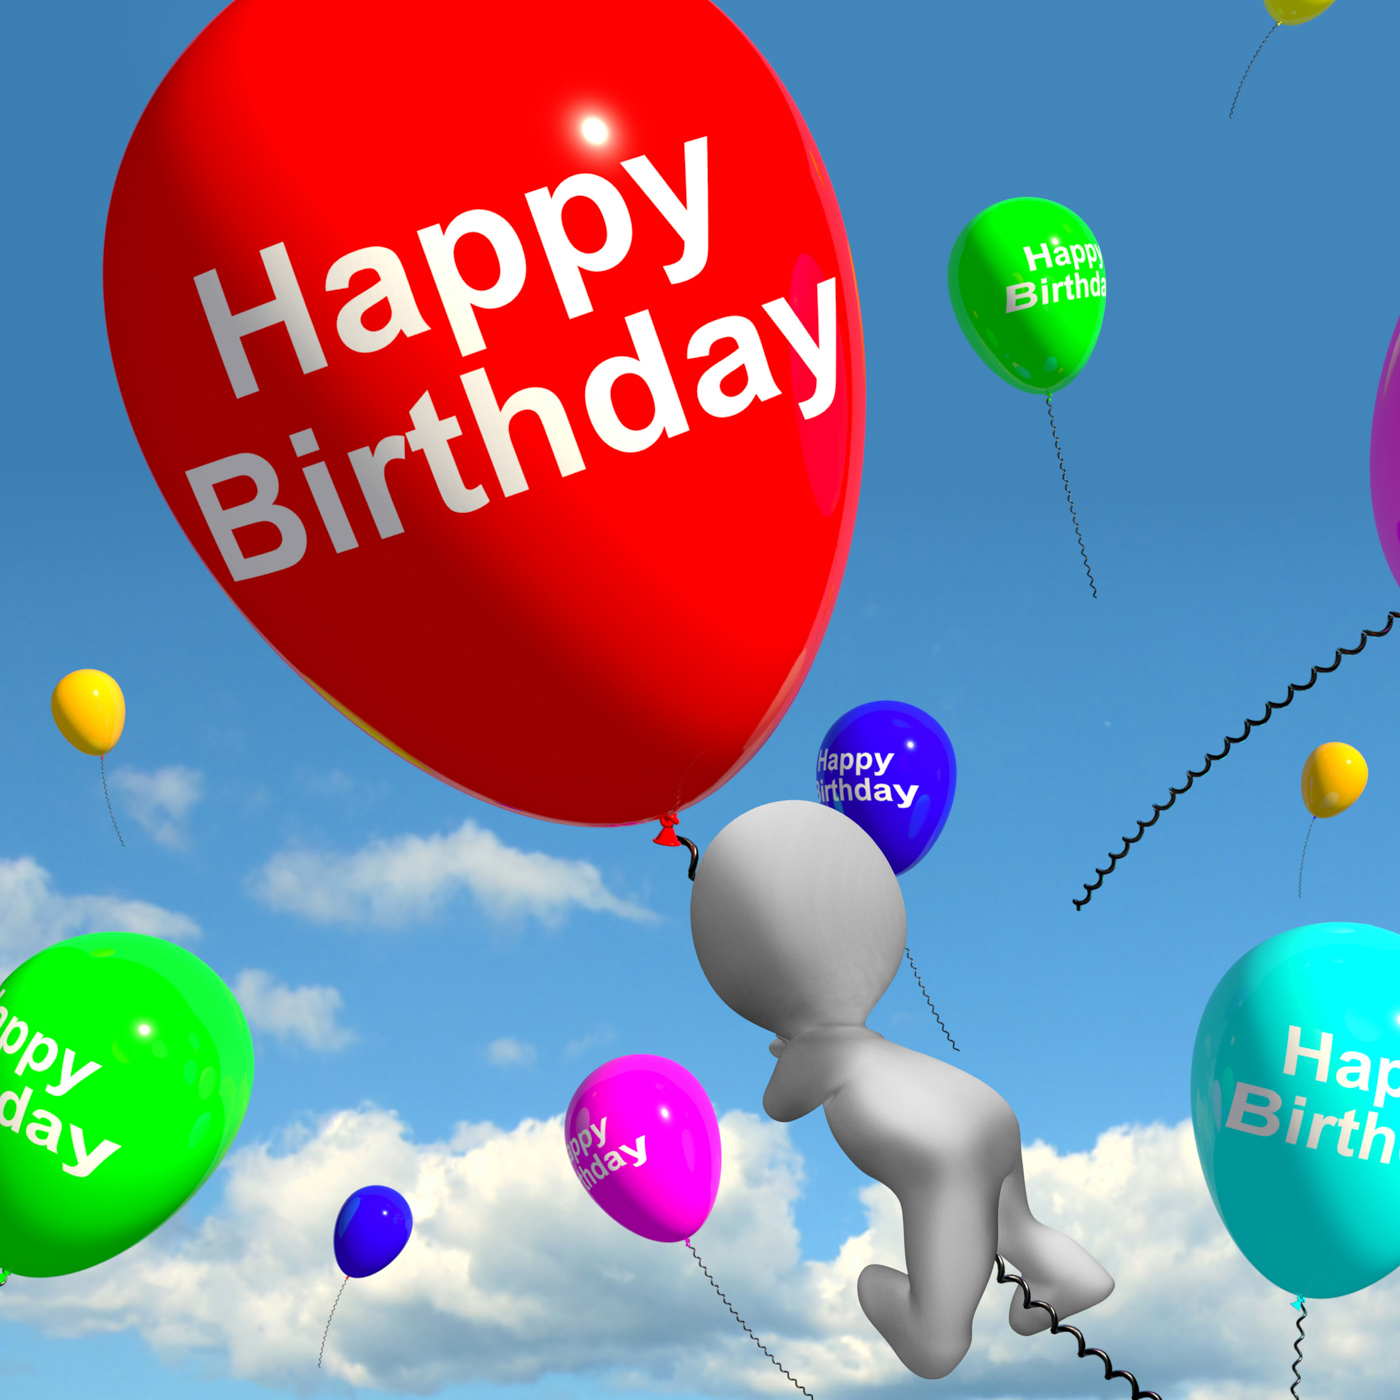 Balloons In the Sky Shows Celebrating Happy Birthday, Balloon, Balloons, Birthday, Celebrate, HQ Photo